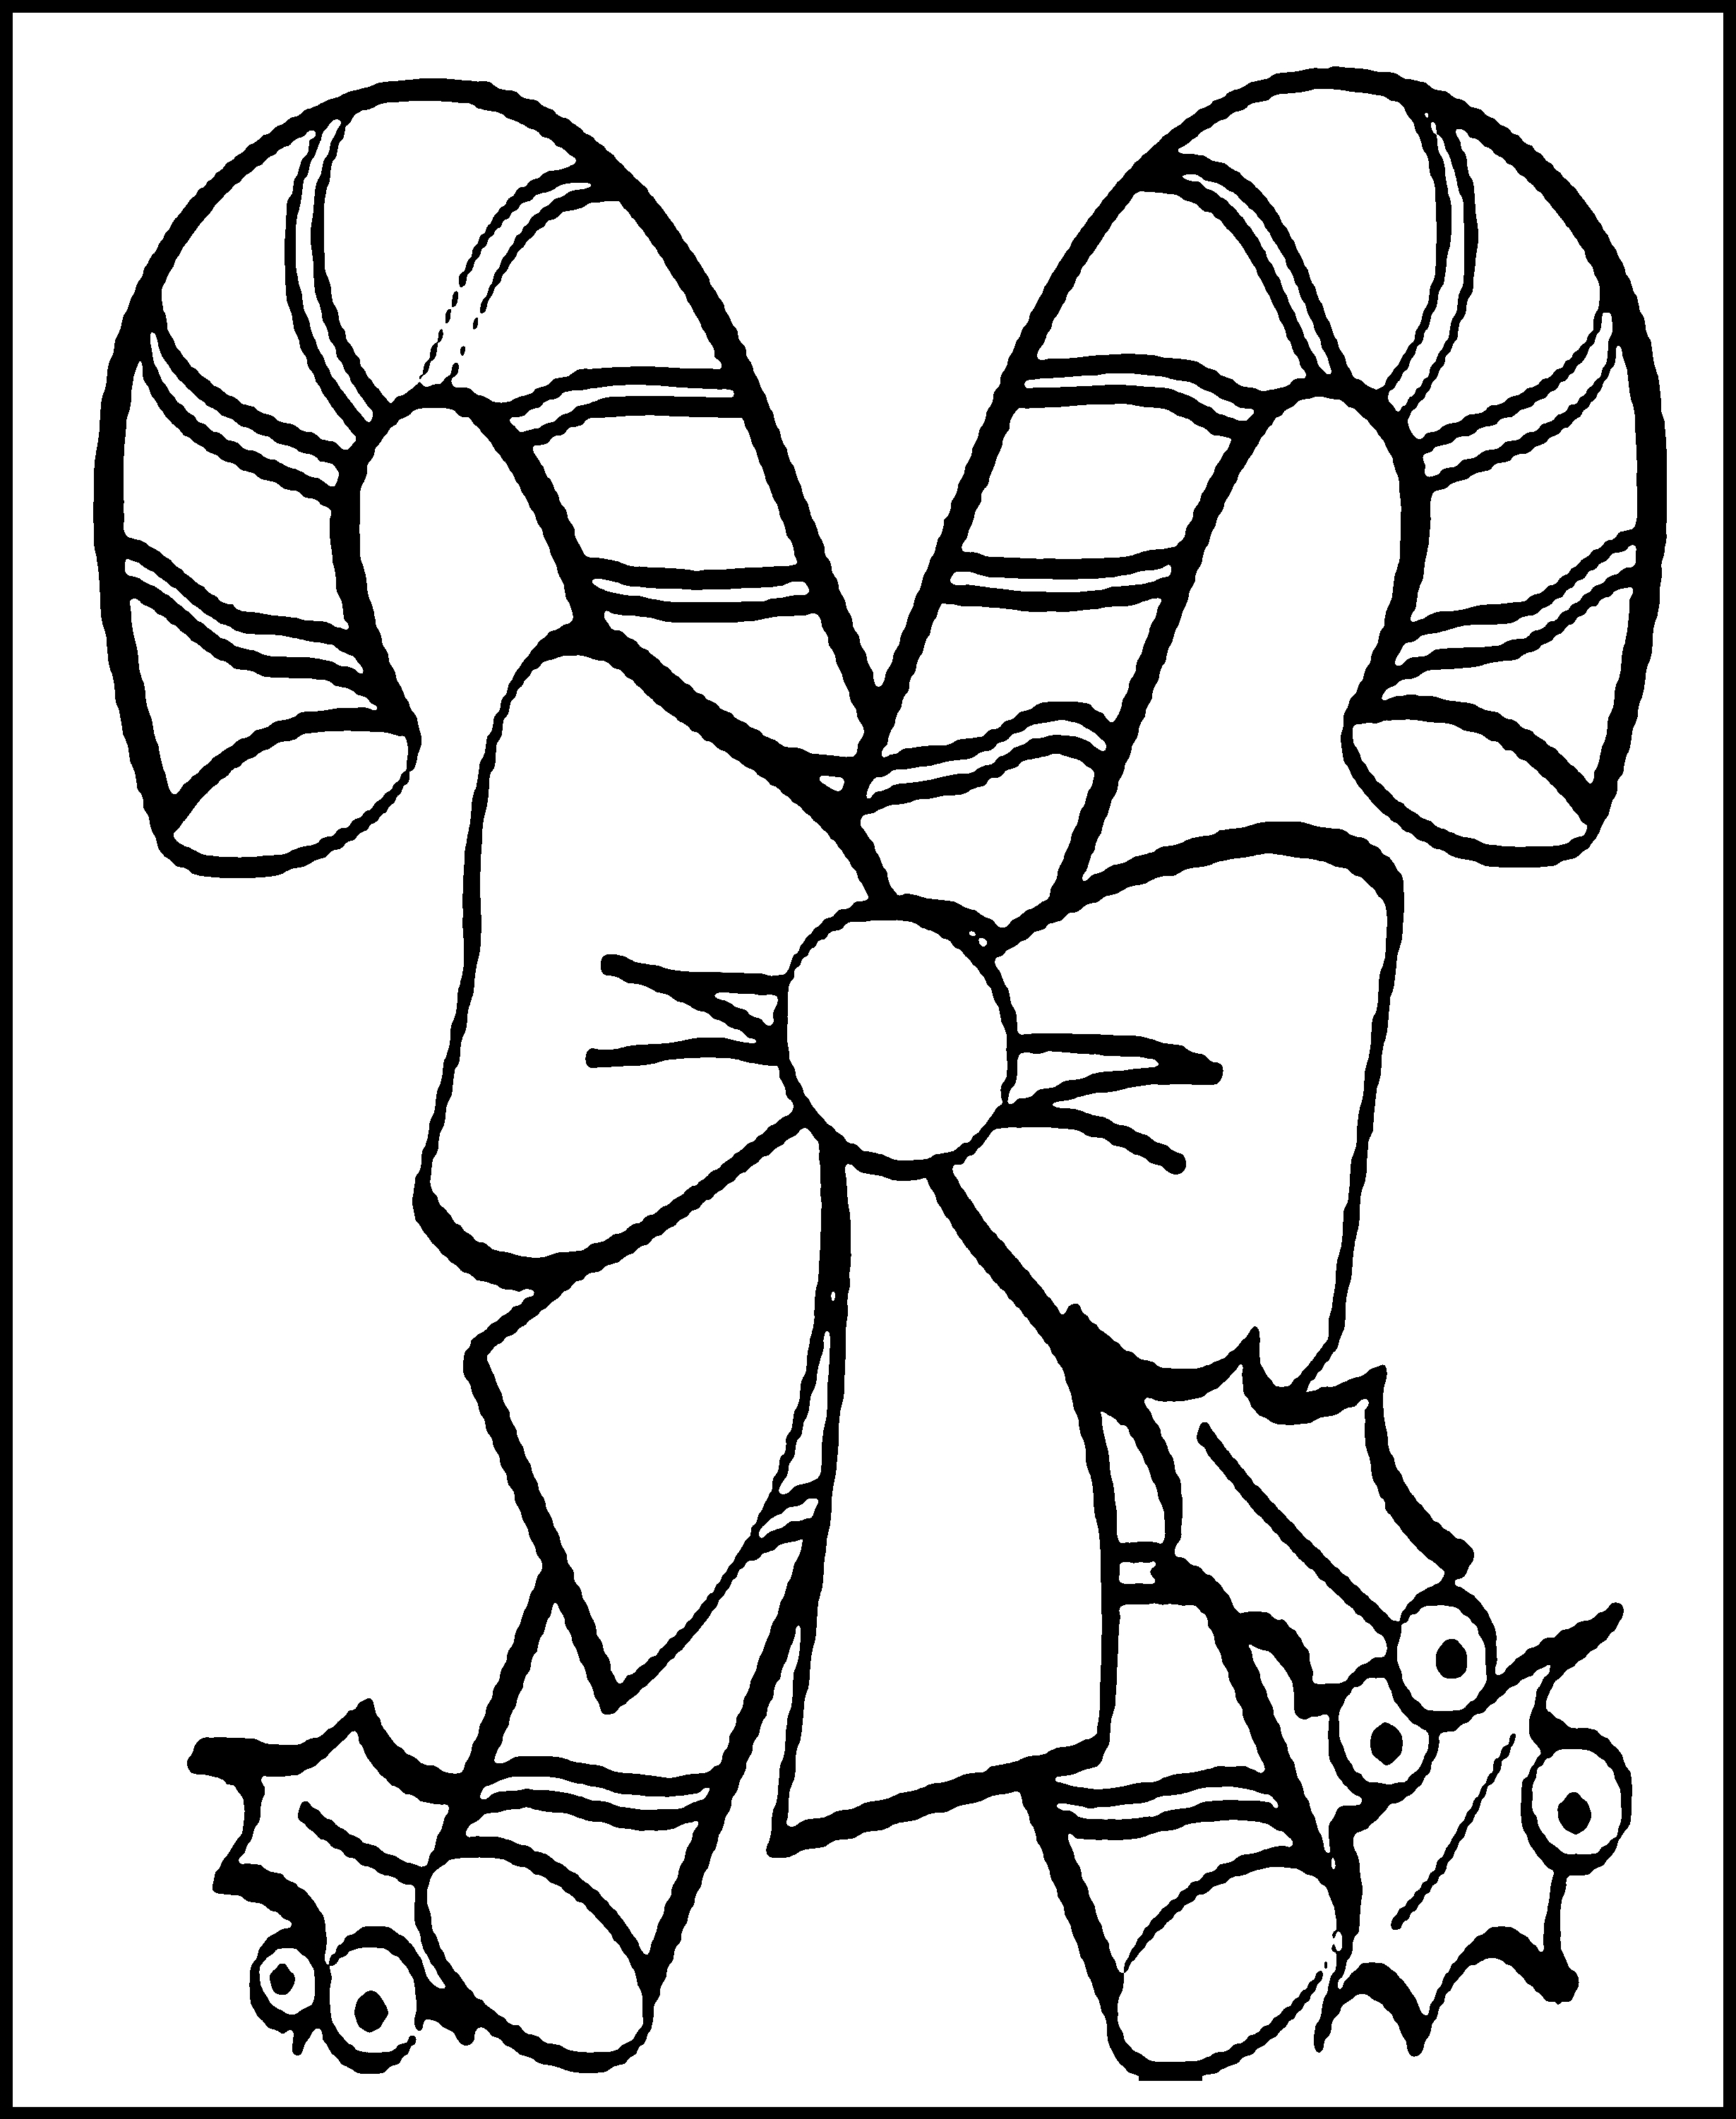 Free Printable Candy Cane Coloring Pages For Kids | Young At Heart - Free Printable Christmas Coloring Sheets